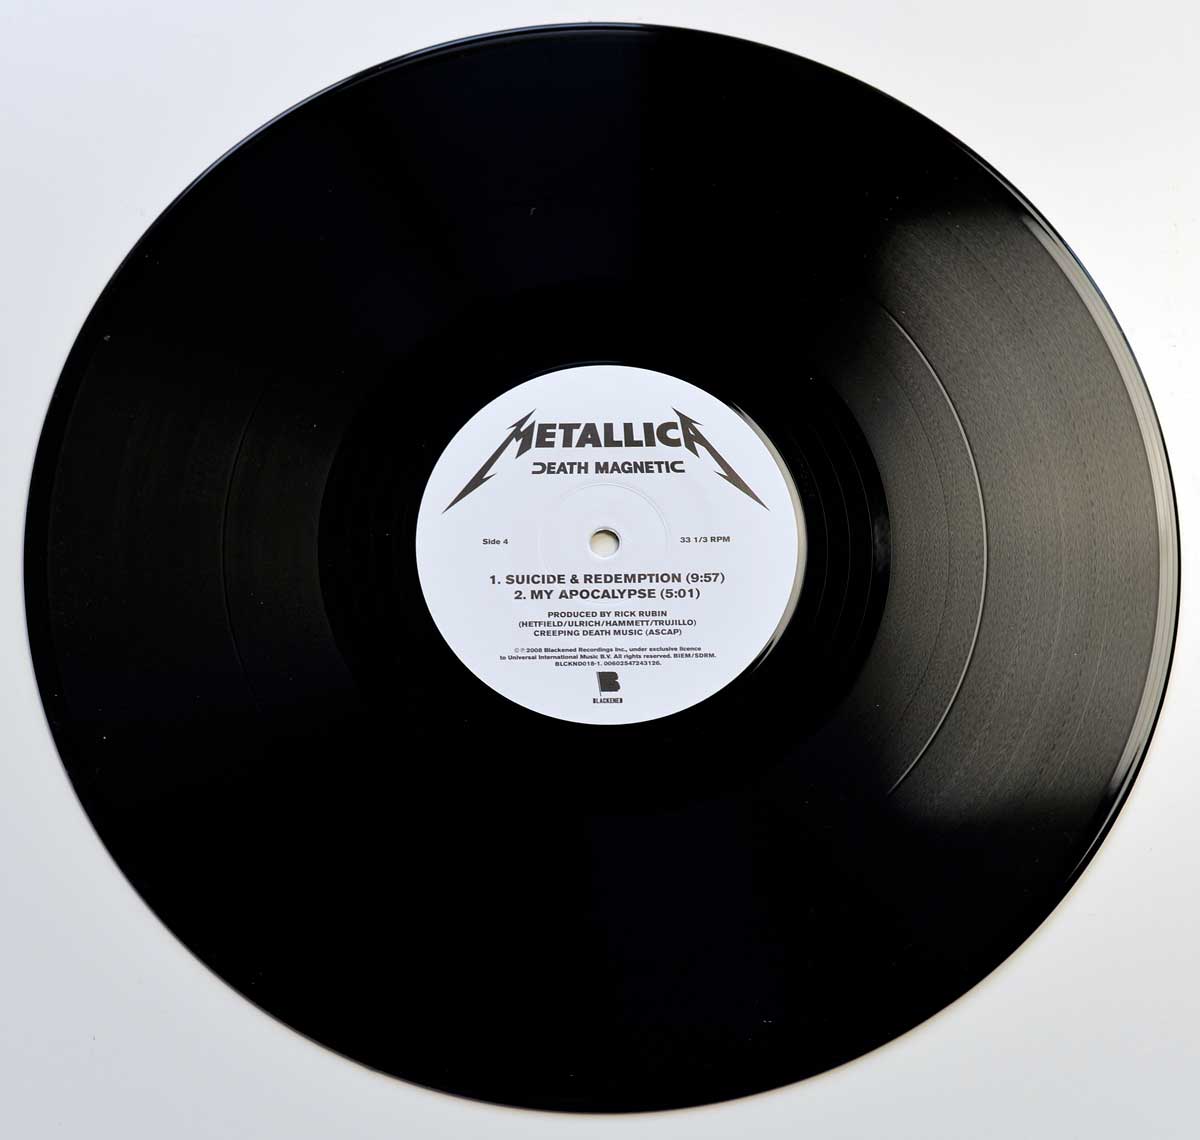 Photo of Side Four: of METALLICA - Death Magnetic Blackened Records Gatefold Cover 12" 